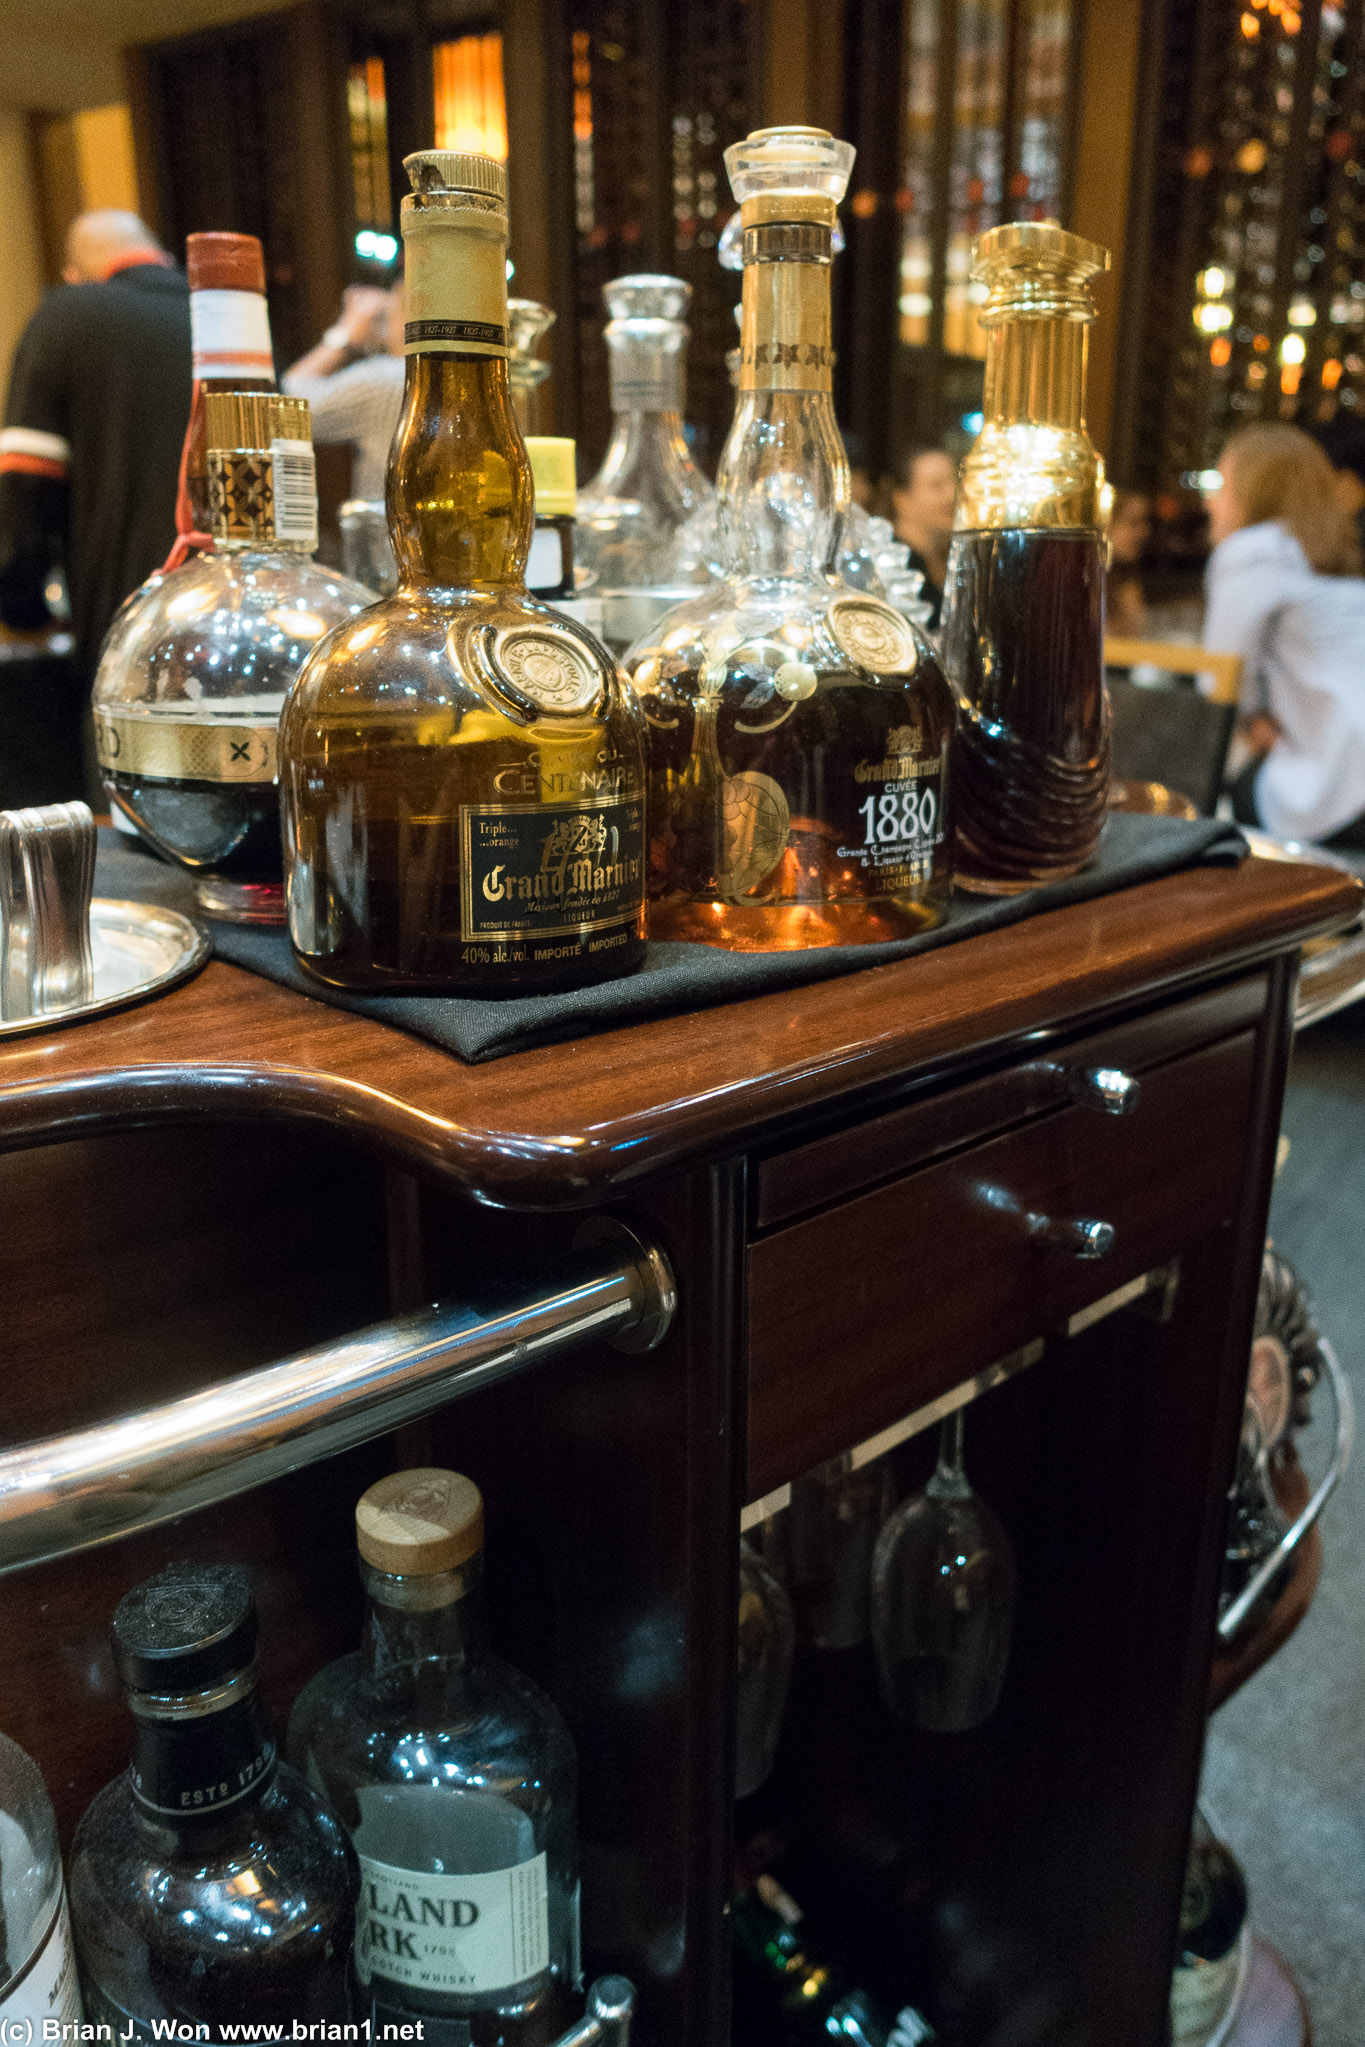 The liquor cart. You can just barely see the Remy Martin Louis XIII hiding on the top.